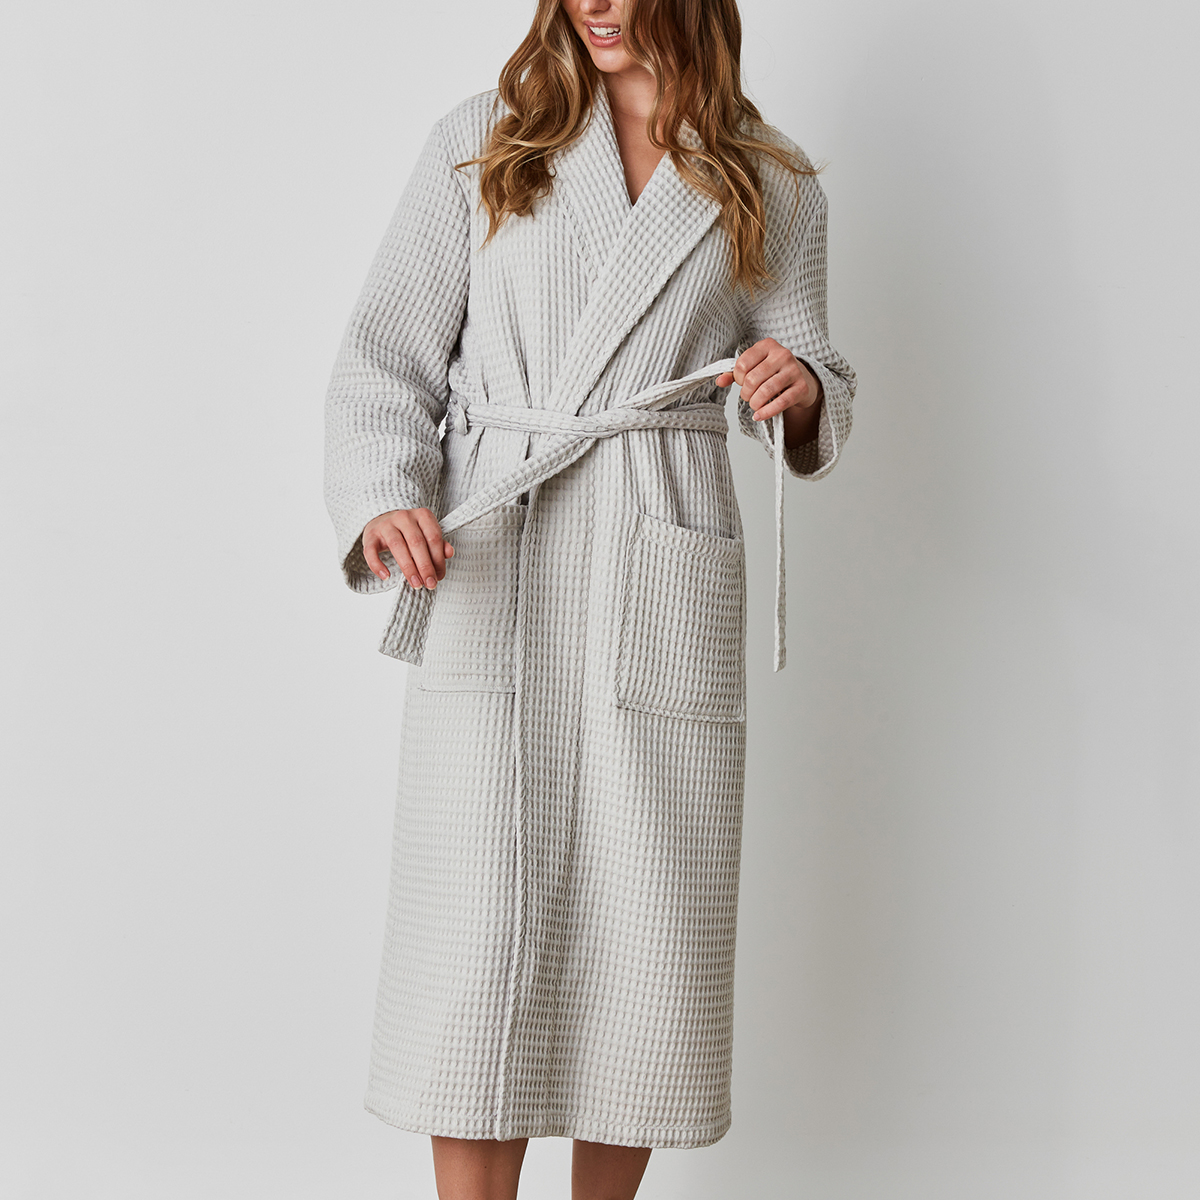 BAGNO MILANO Waffle Robes for Women Cotton –%100 Turkish Cotton Bathrobes  for Women Made in Turkey, Grey S-M at Amazon Women's Clothing store